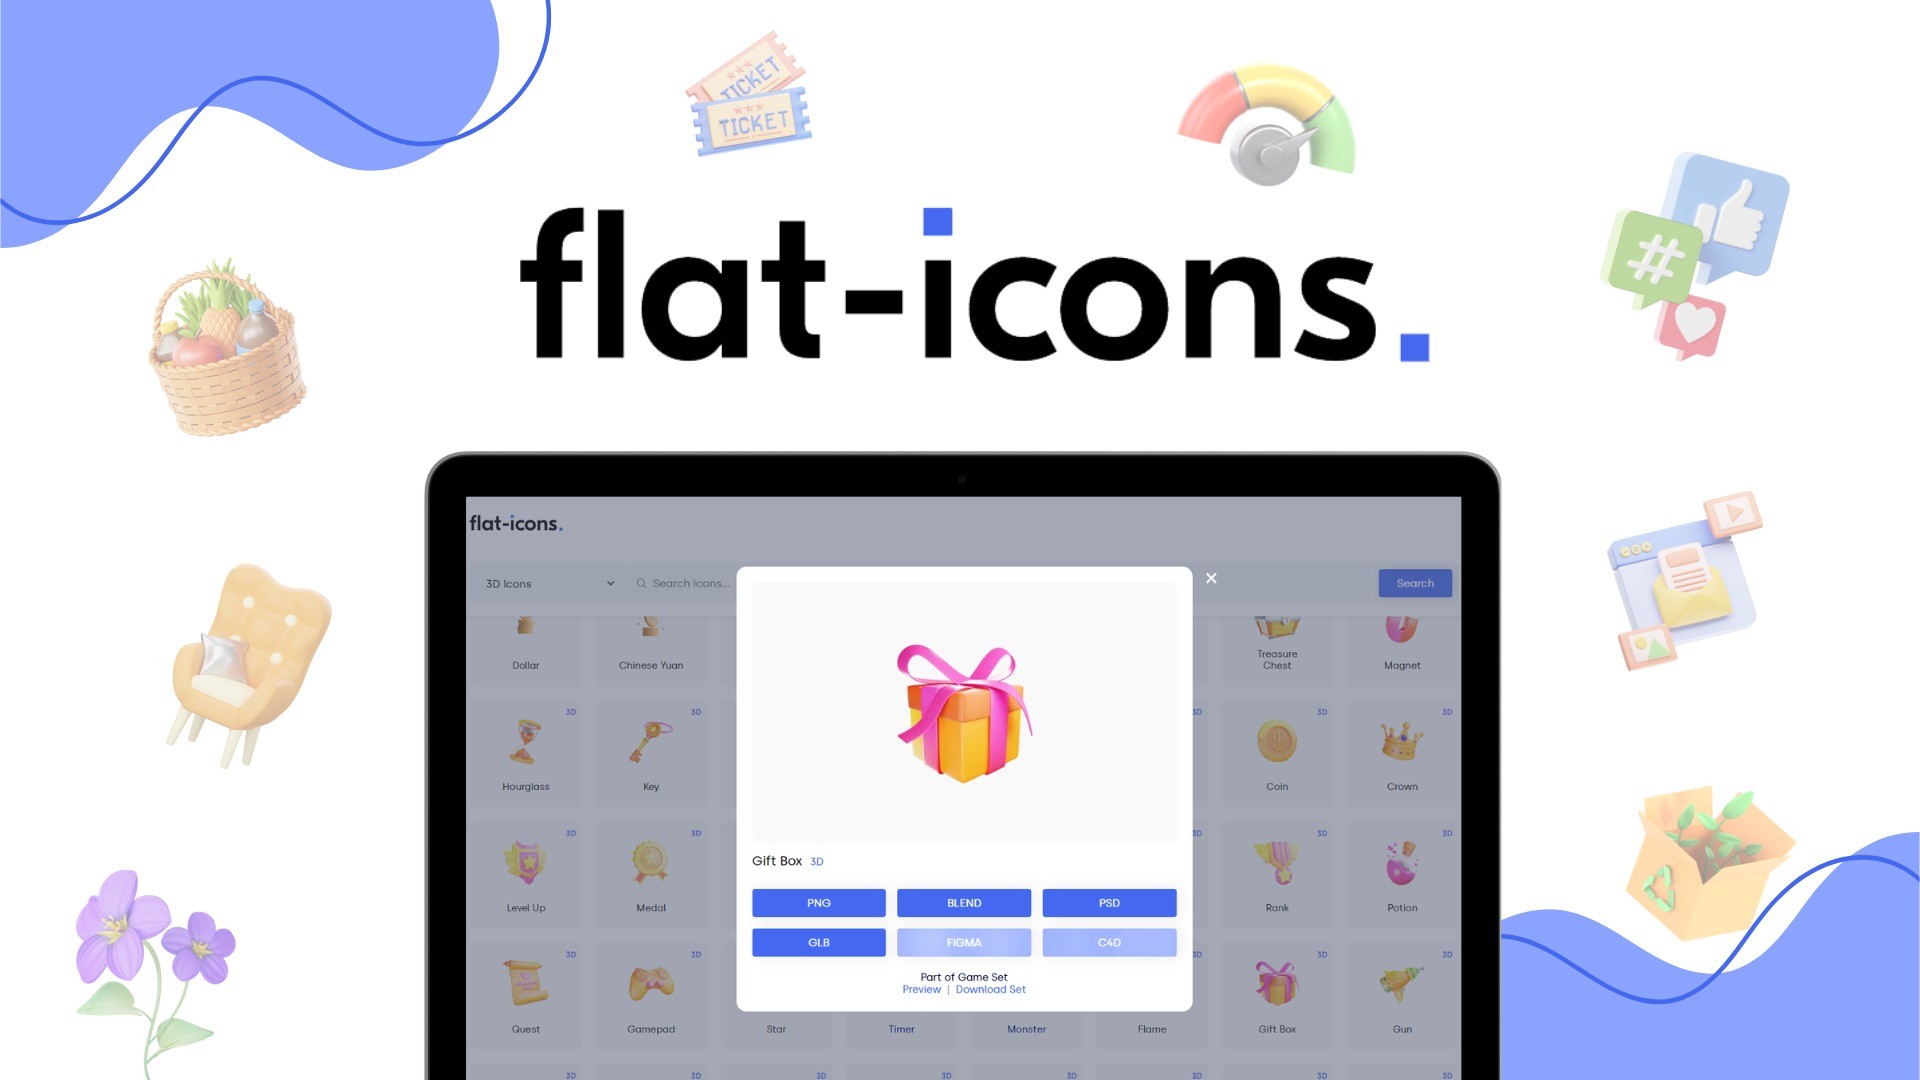 Flat Icons – 31,000+ icons (2D, 3D, and Animated)